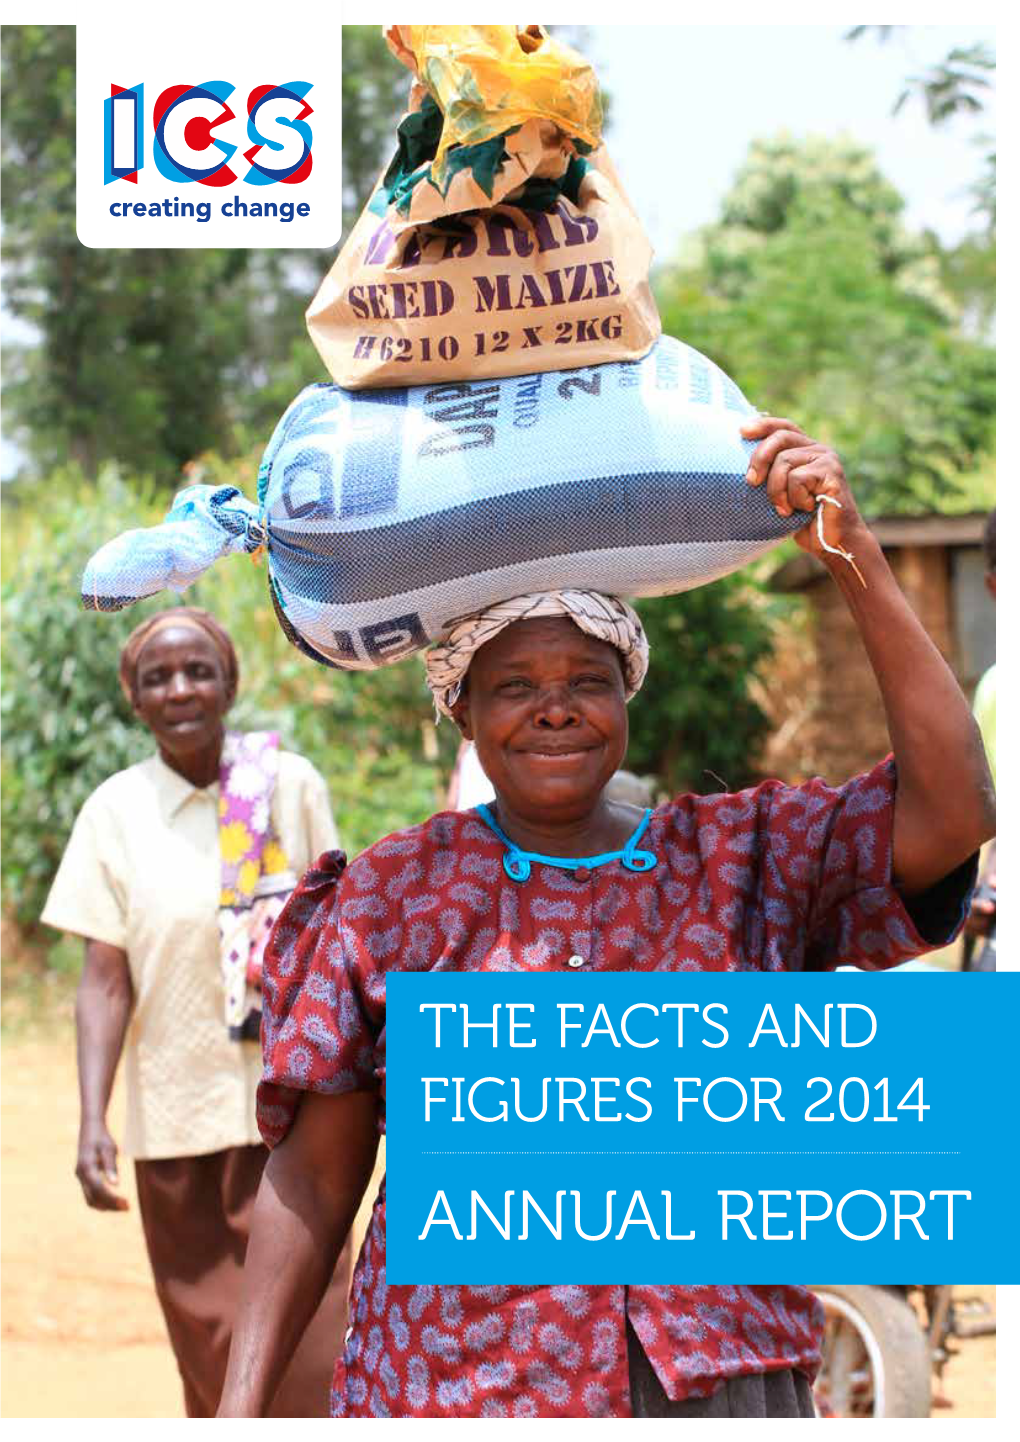 ANNUAL REPORT Contents PIONEERING for SUSTAINABLE Report of an Eventful Year Foreword